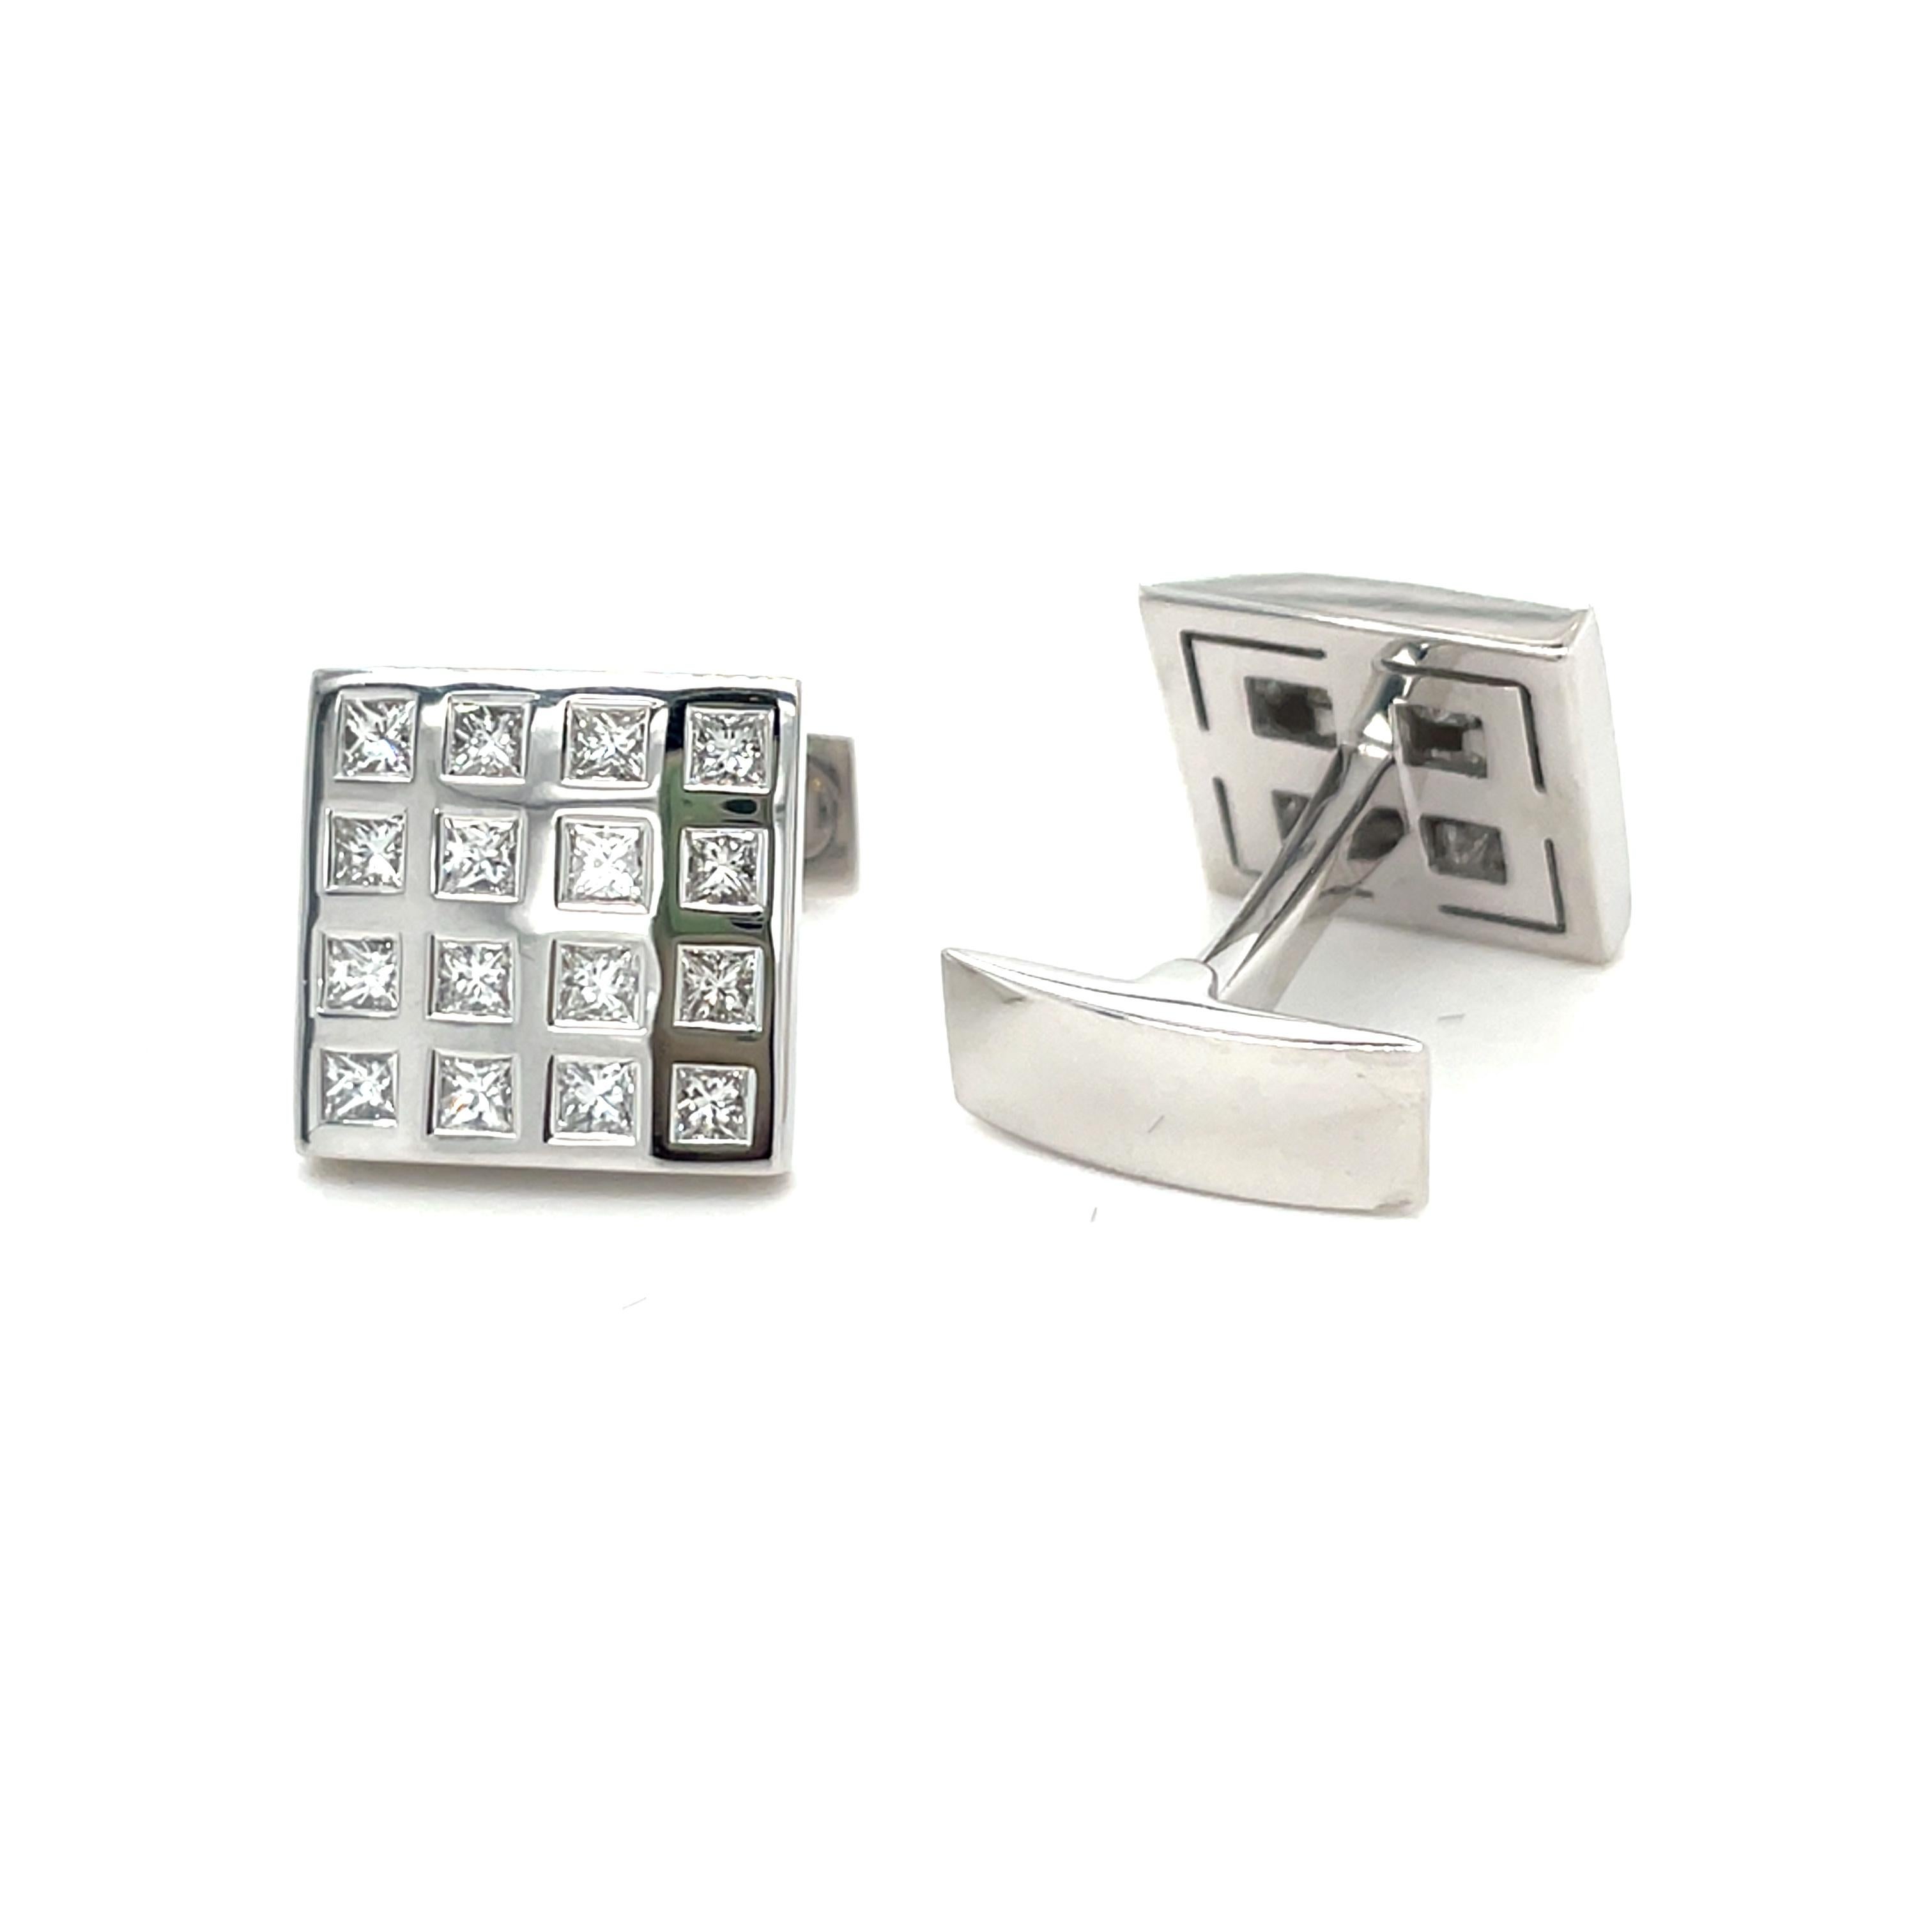 These white gold cufflinks are from Men's Collection. These cufflinks are decorated with White gold, 16 natural princess diamond G color VS clarity 1.94 ct. The dimensions of the cufflinks are 1.4cm x 1.4cm. These cufflinks are a perfect upgrade to